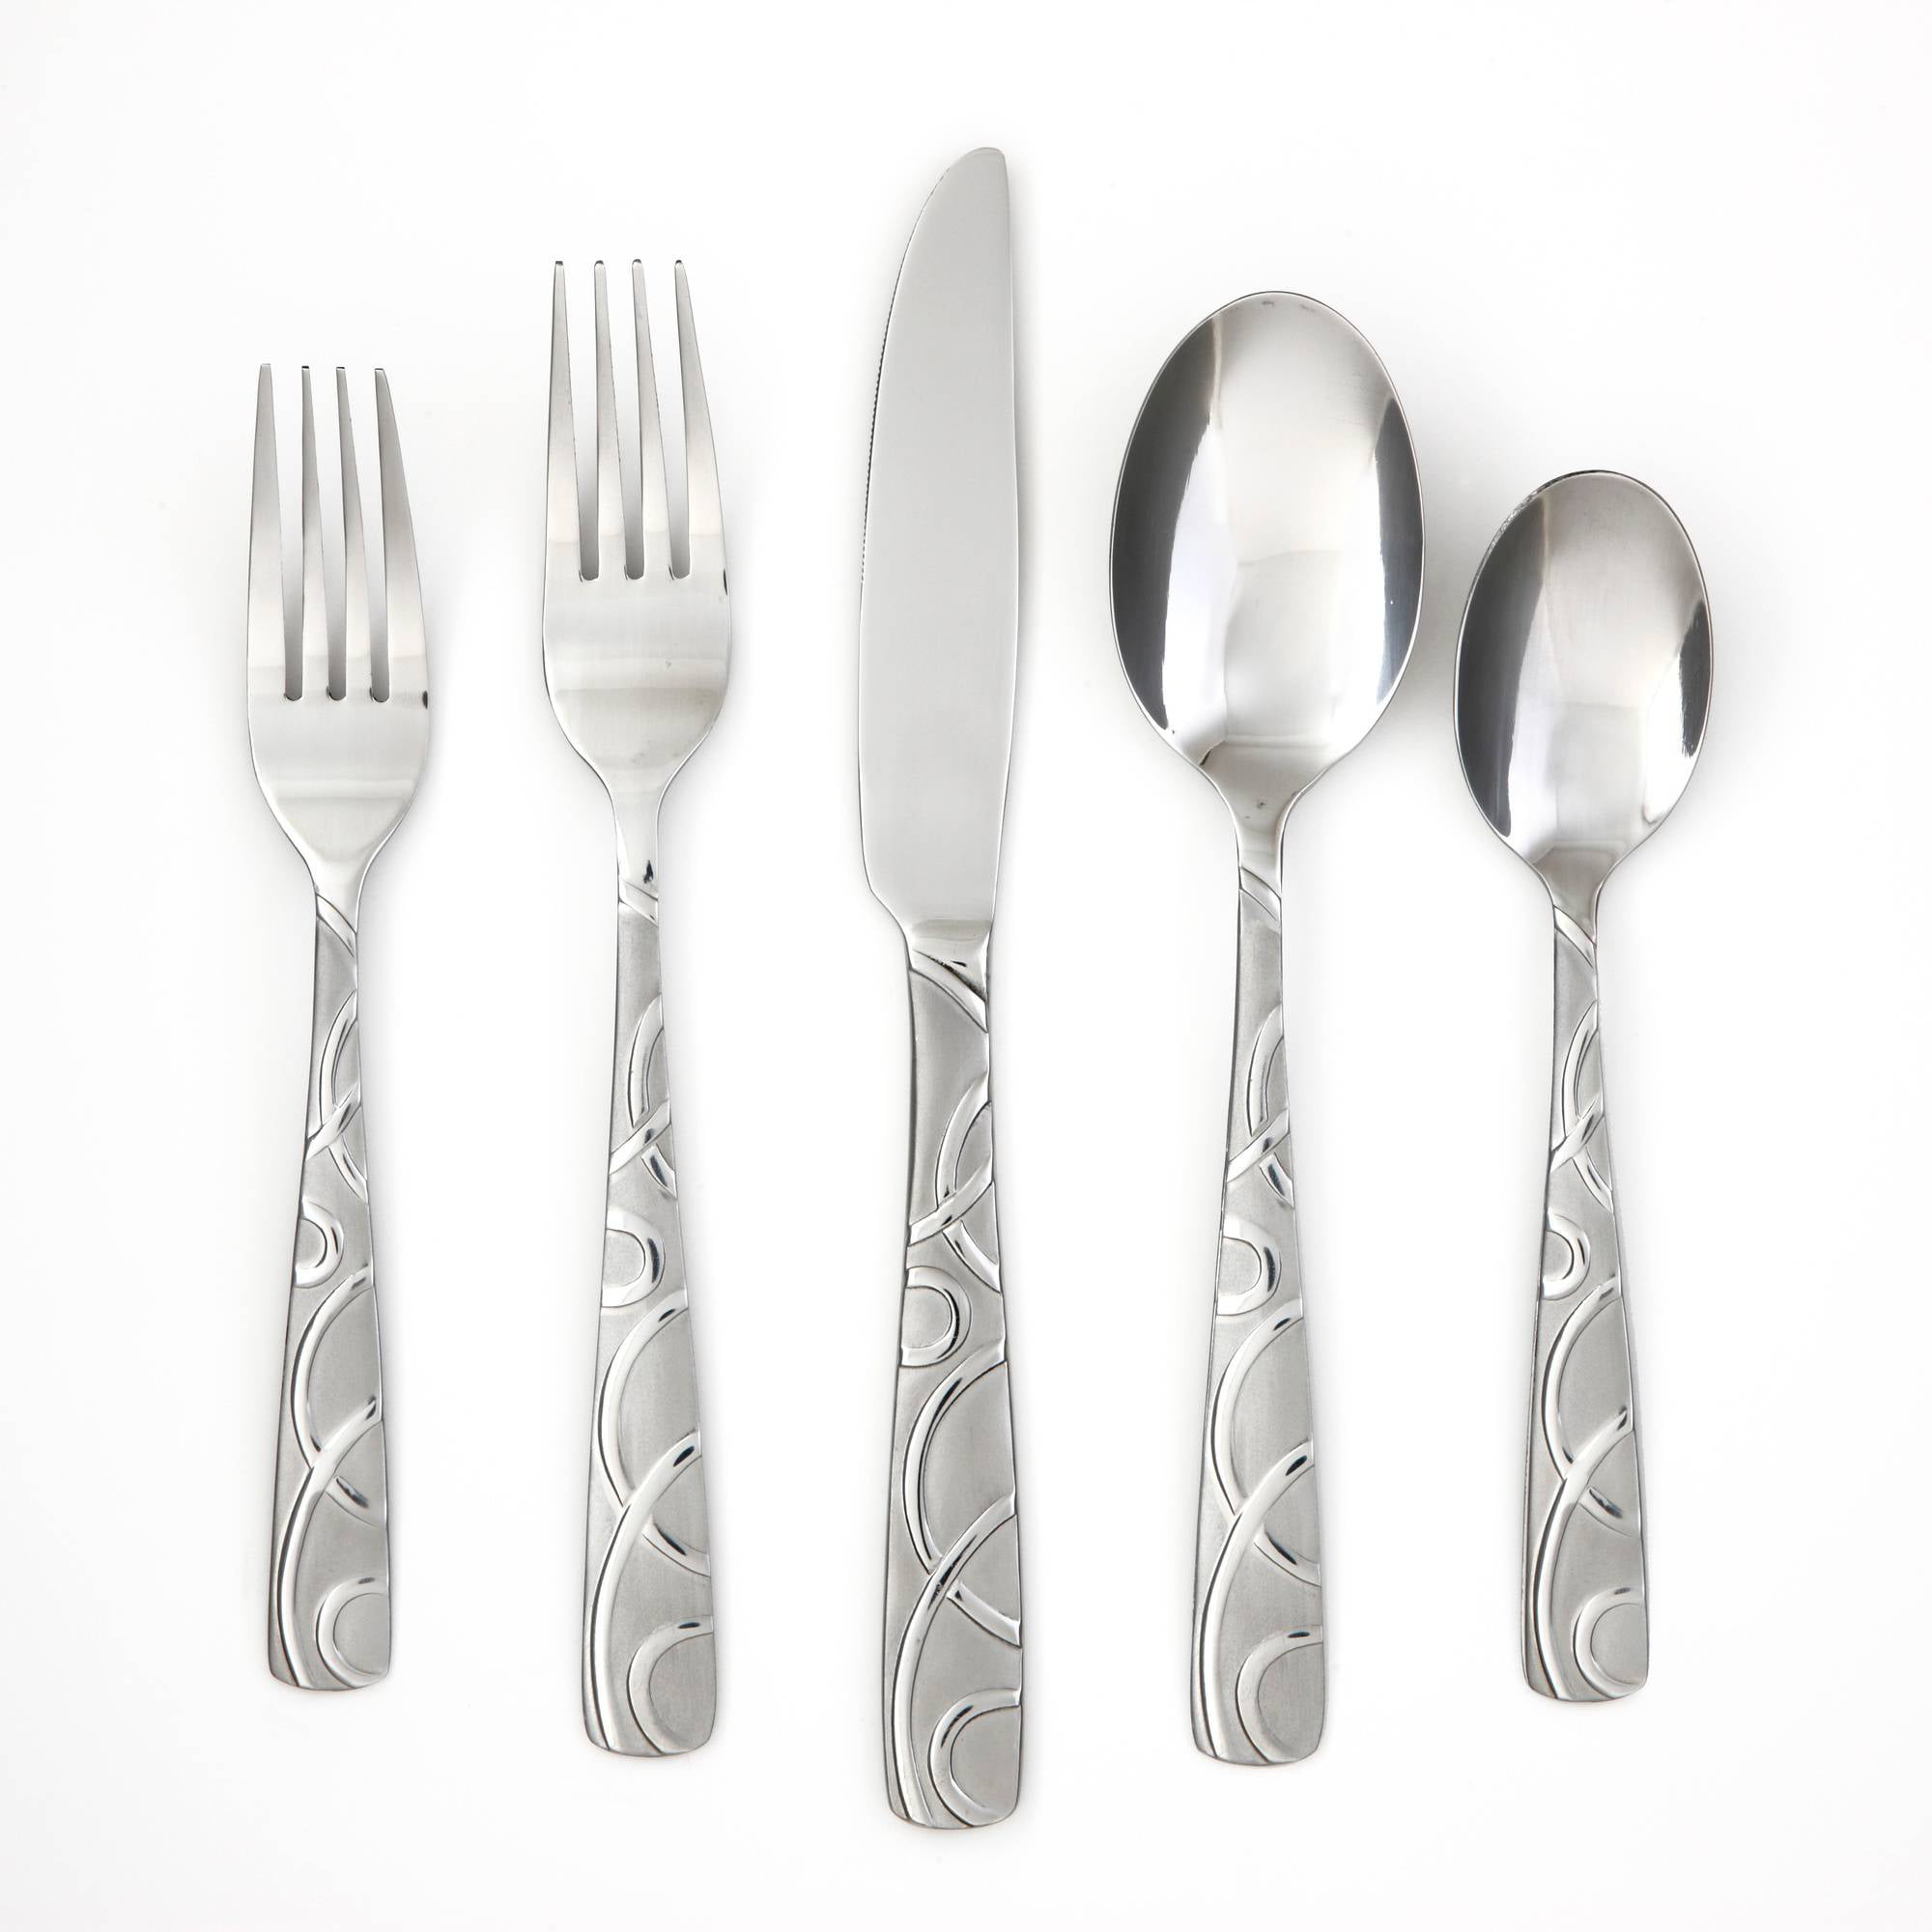 Looking to Buy New Flatware This Year. Discover Why Cambridge is the Clear Choice